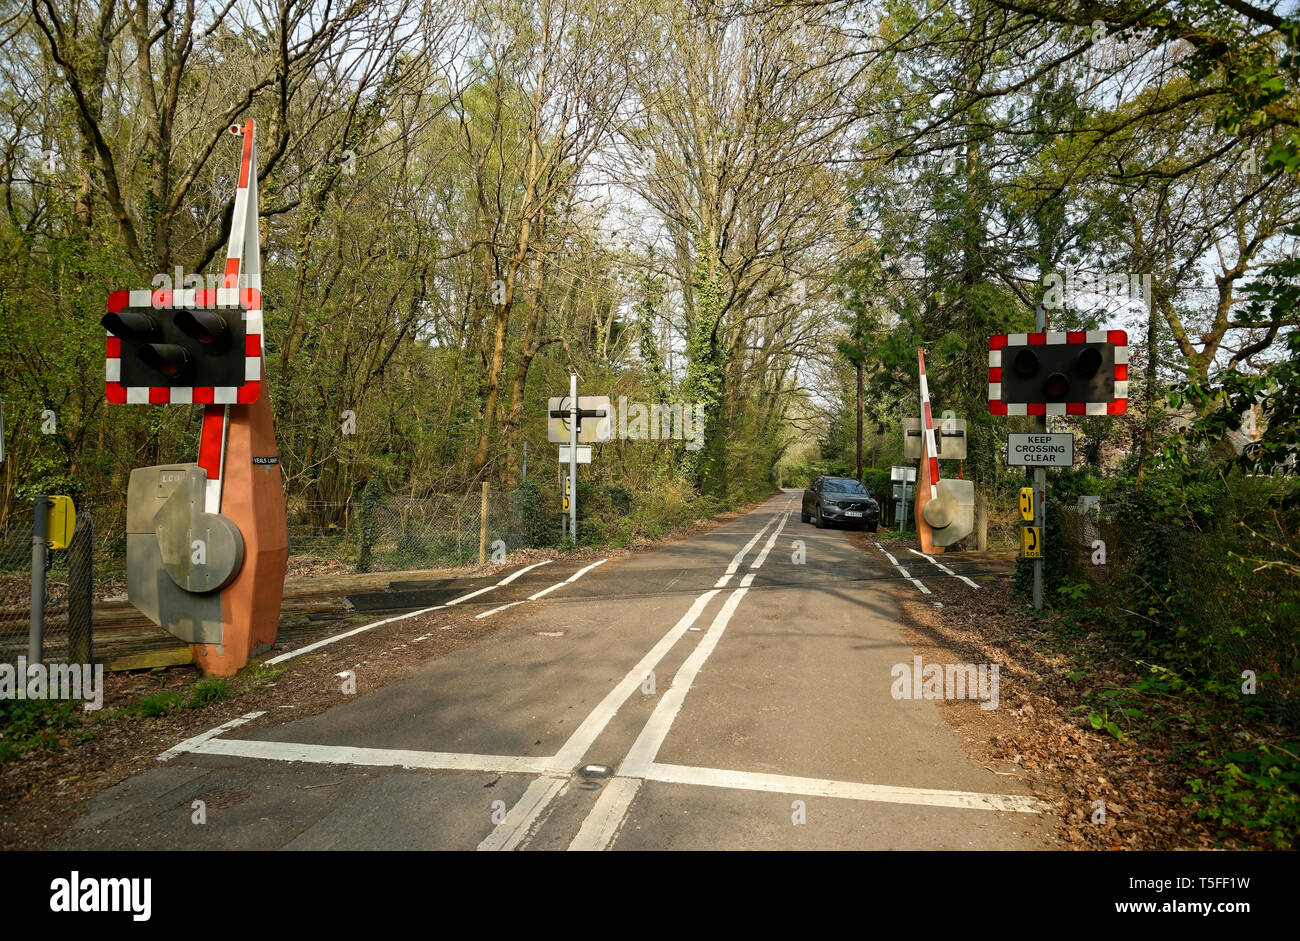 Rail and road intersection. Level crossing. Operated automatically. Stock Photo